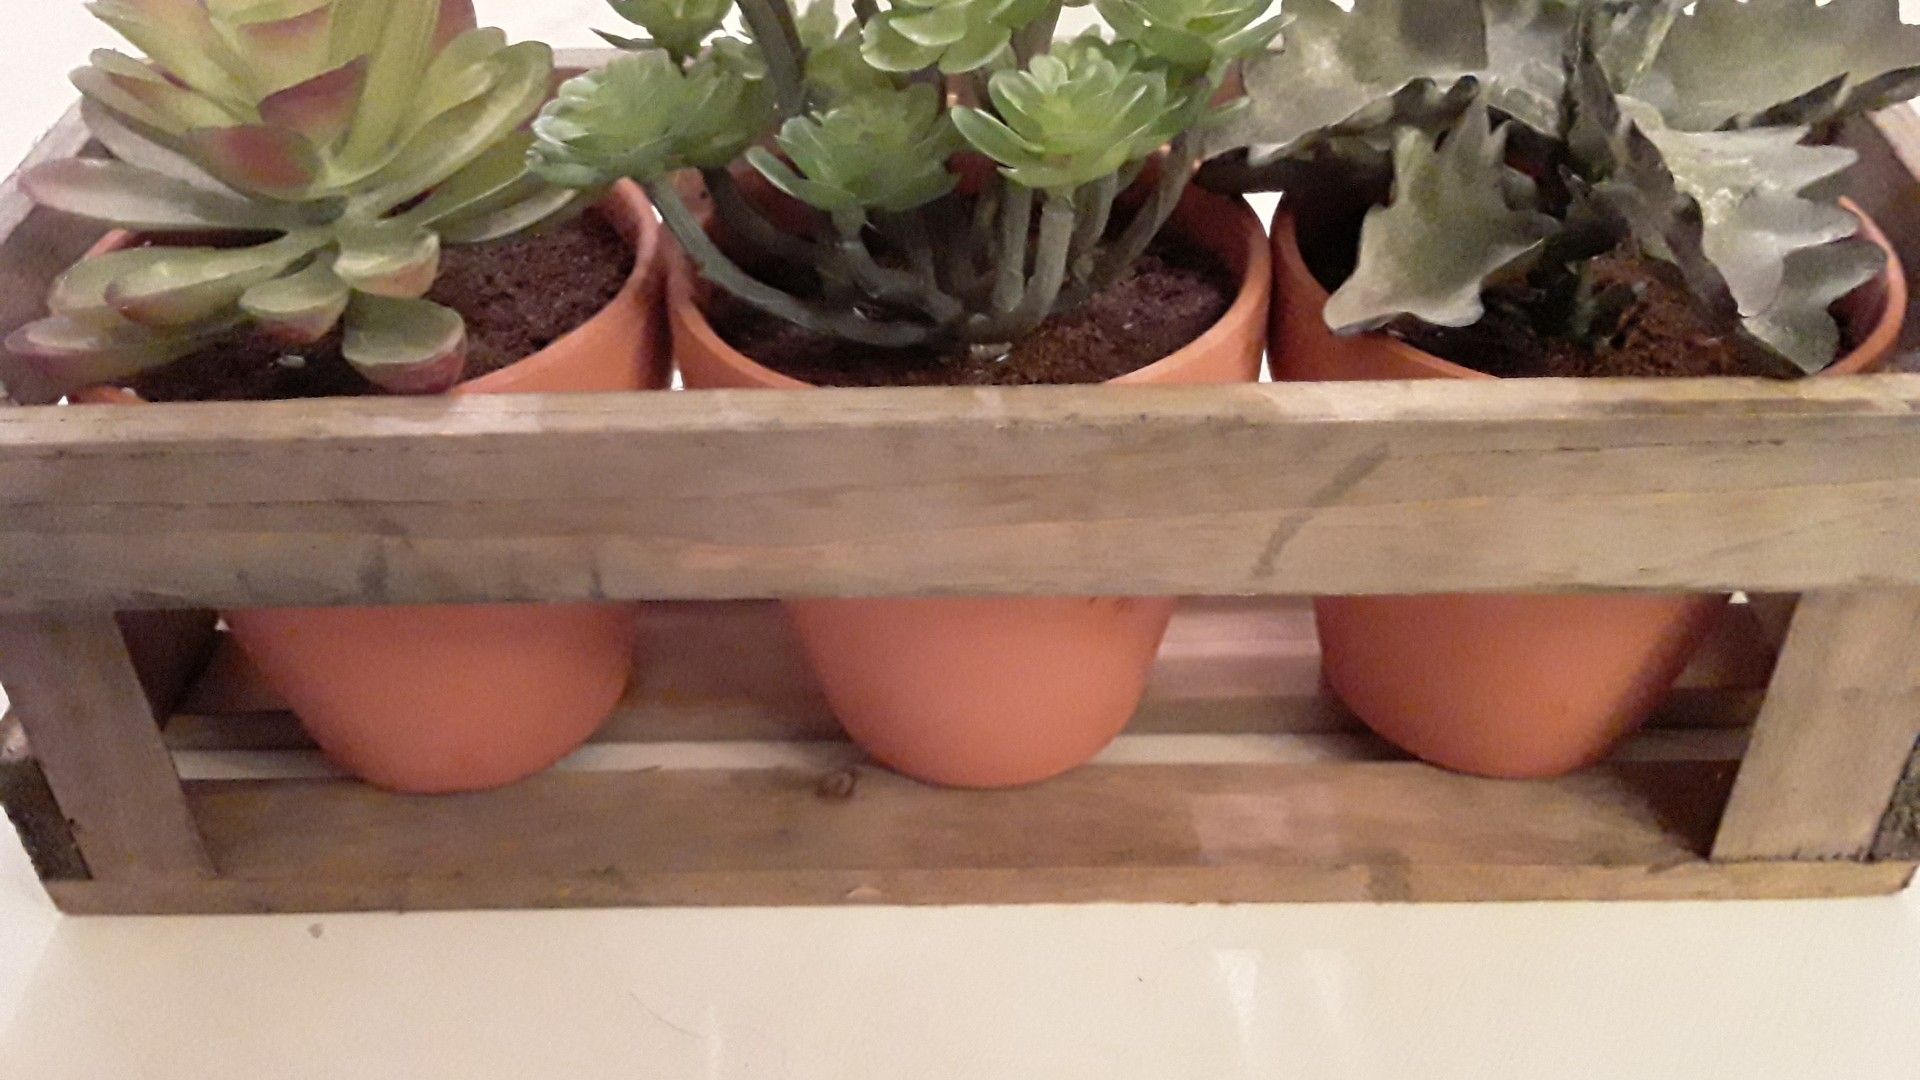 Brand new beautiful wood table top piece with 3 artificial succulents plants in clay pots. Gorgeous!!!